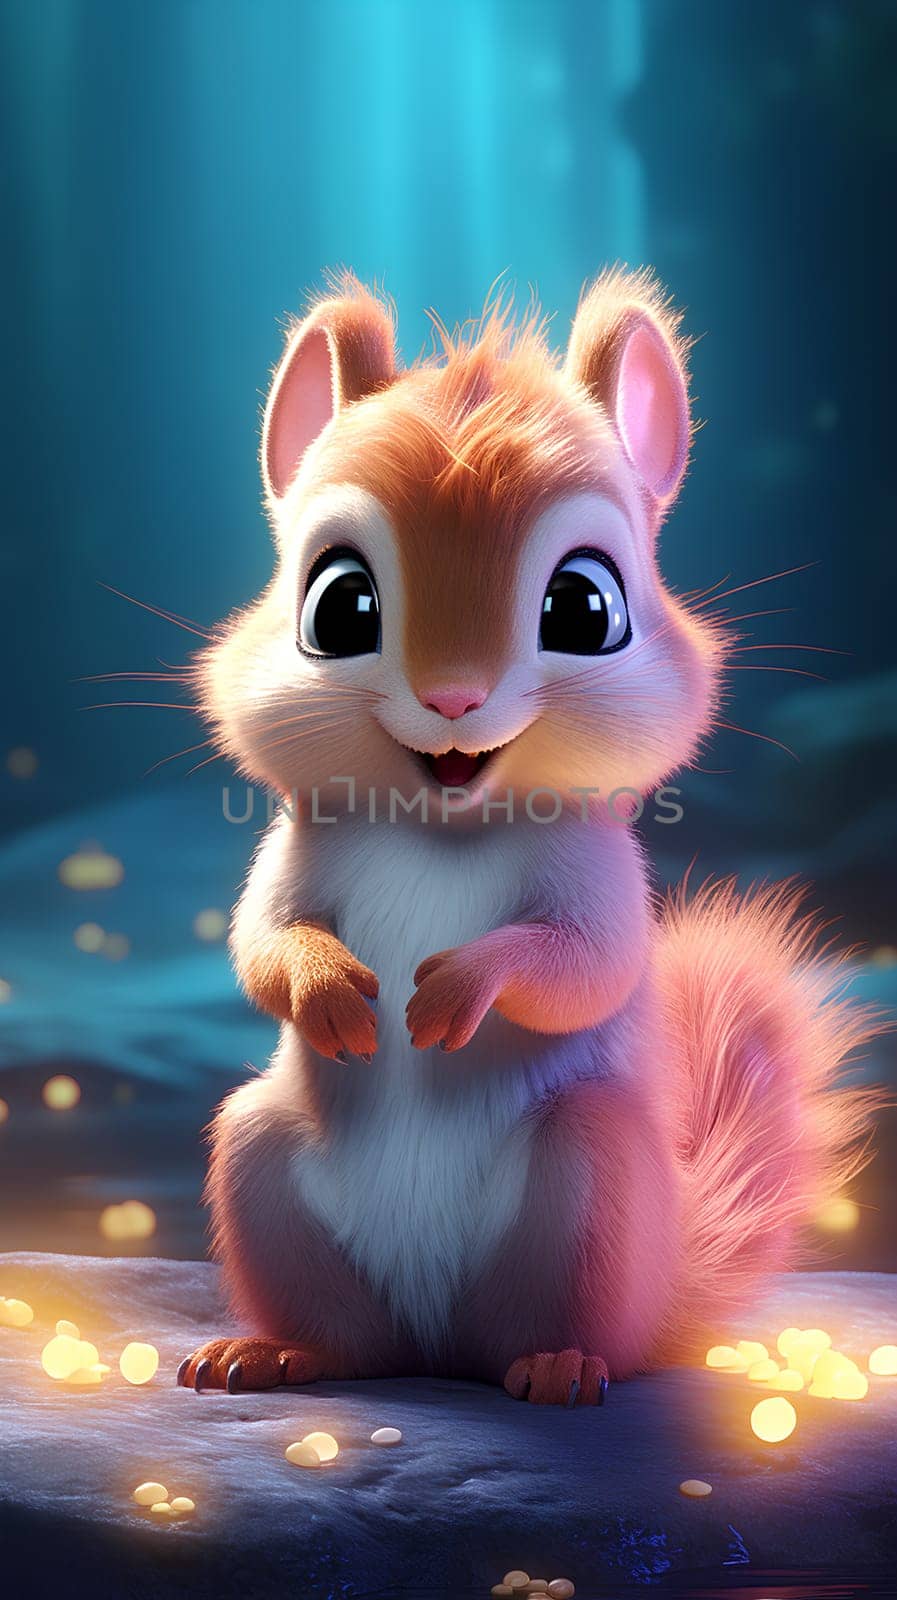 A close up of a cute cartoon squirrel in a magical forest by chrisroll